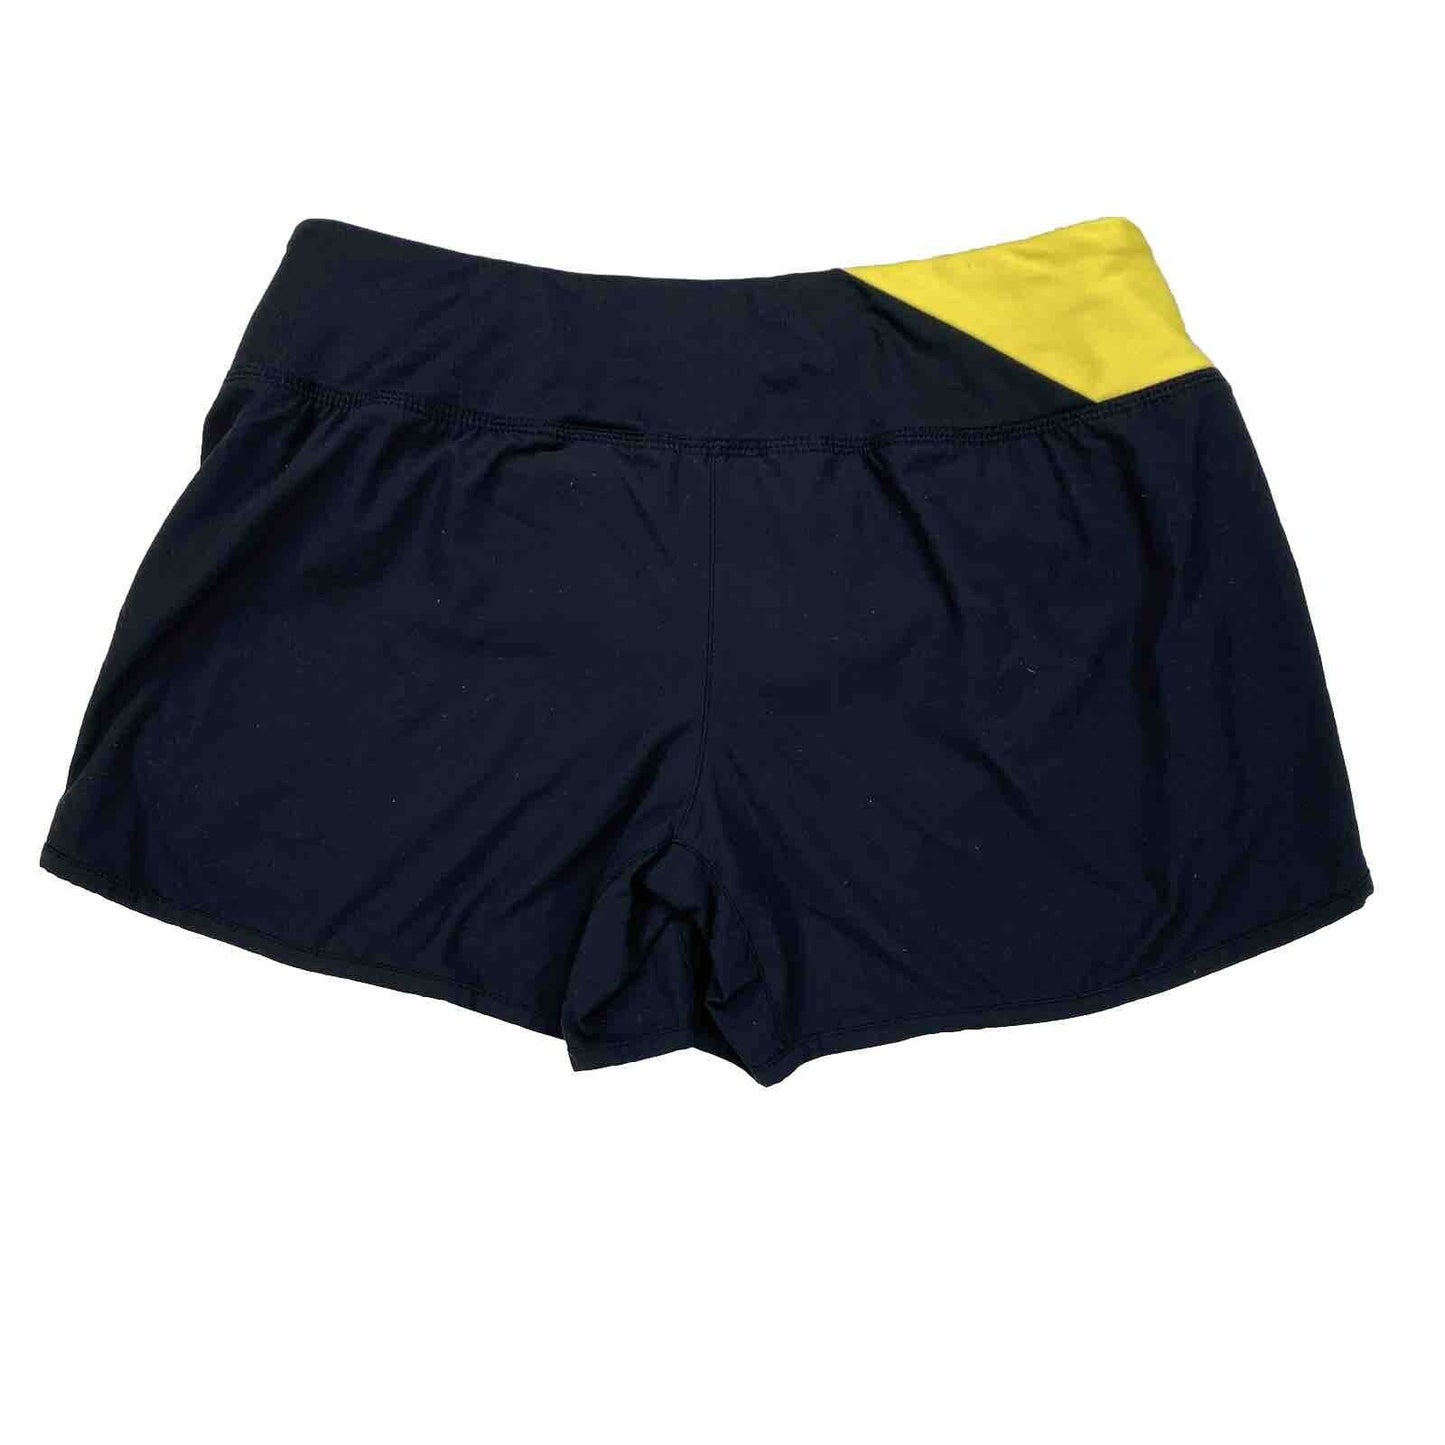 Nike Women's Black Livestrong Lined Athletic Shorts - S